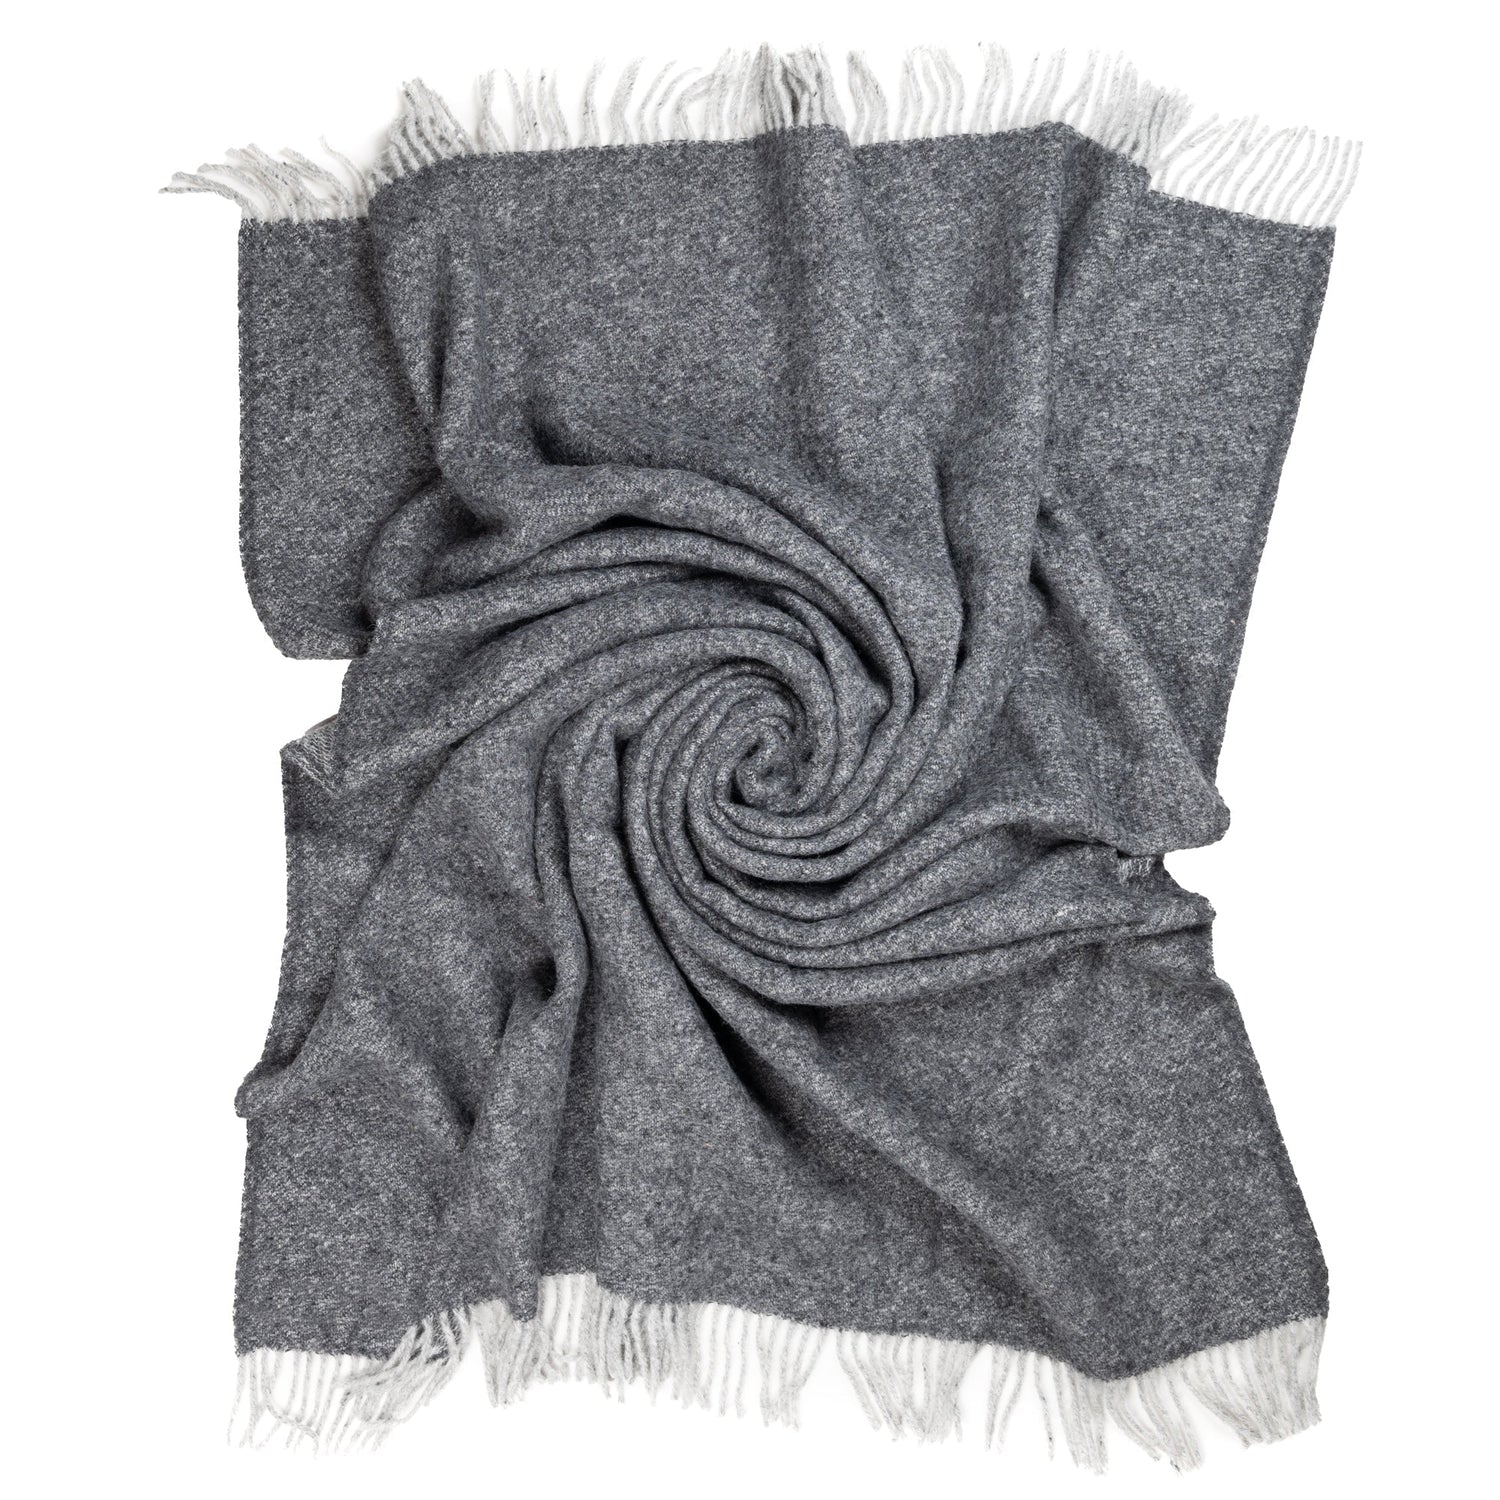 Southampton Home Wool Twill Throw Blanket (Charcoal)-Throws and Blankets-SHWoolTwillCharcoal-Prince of Scots